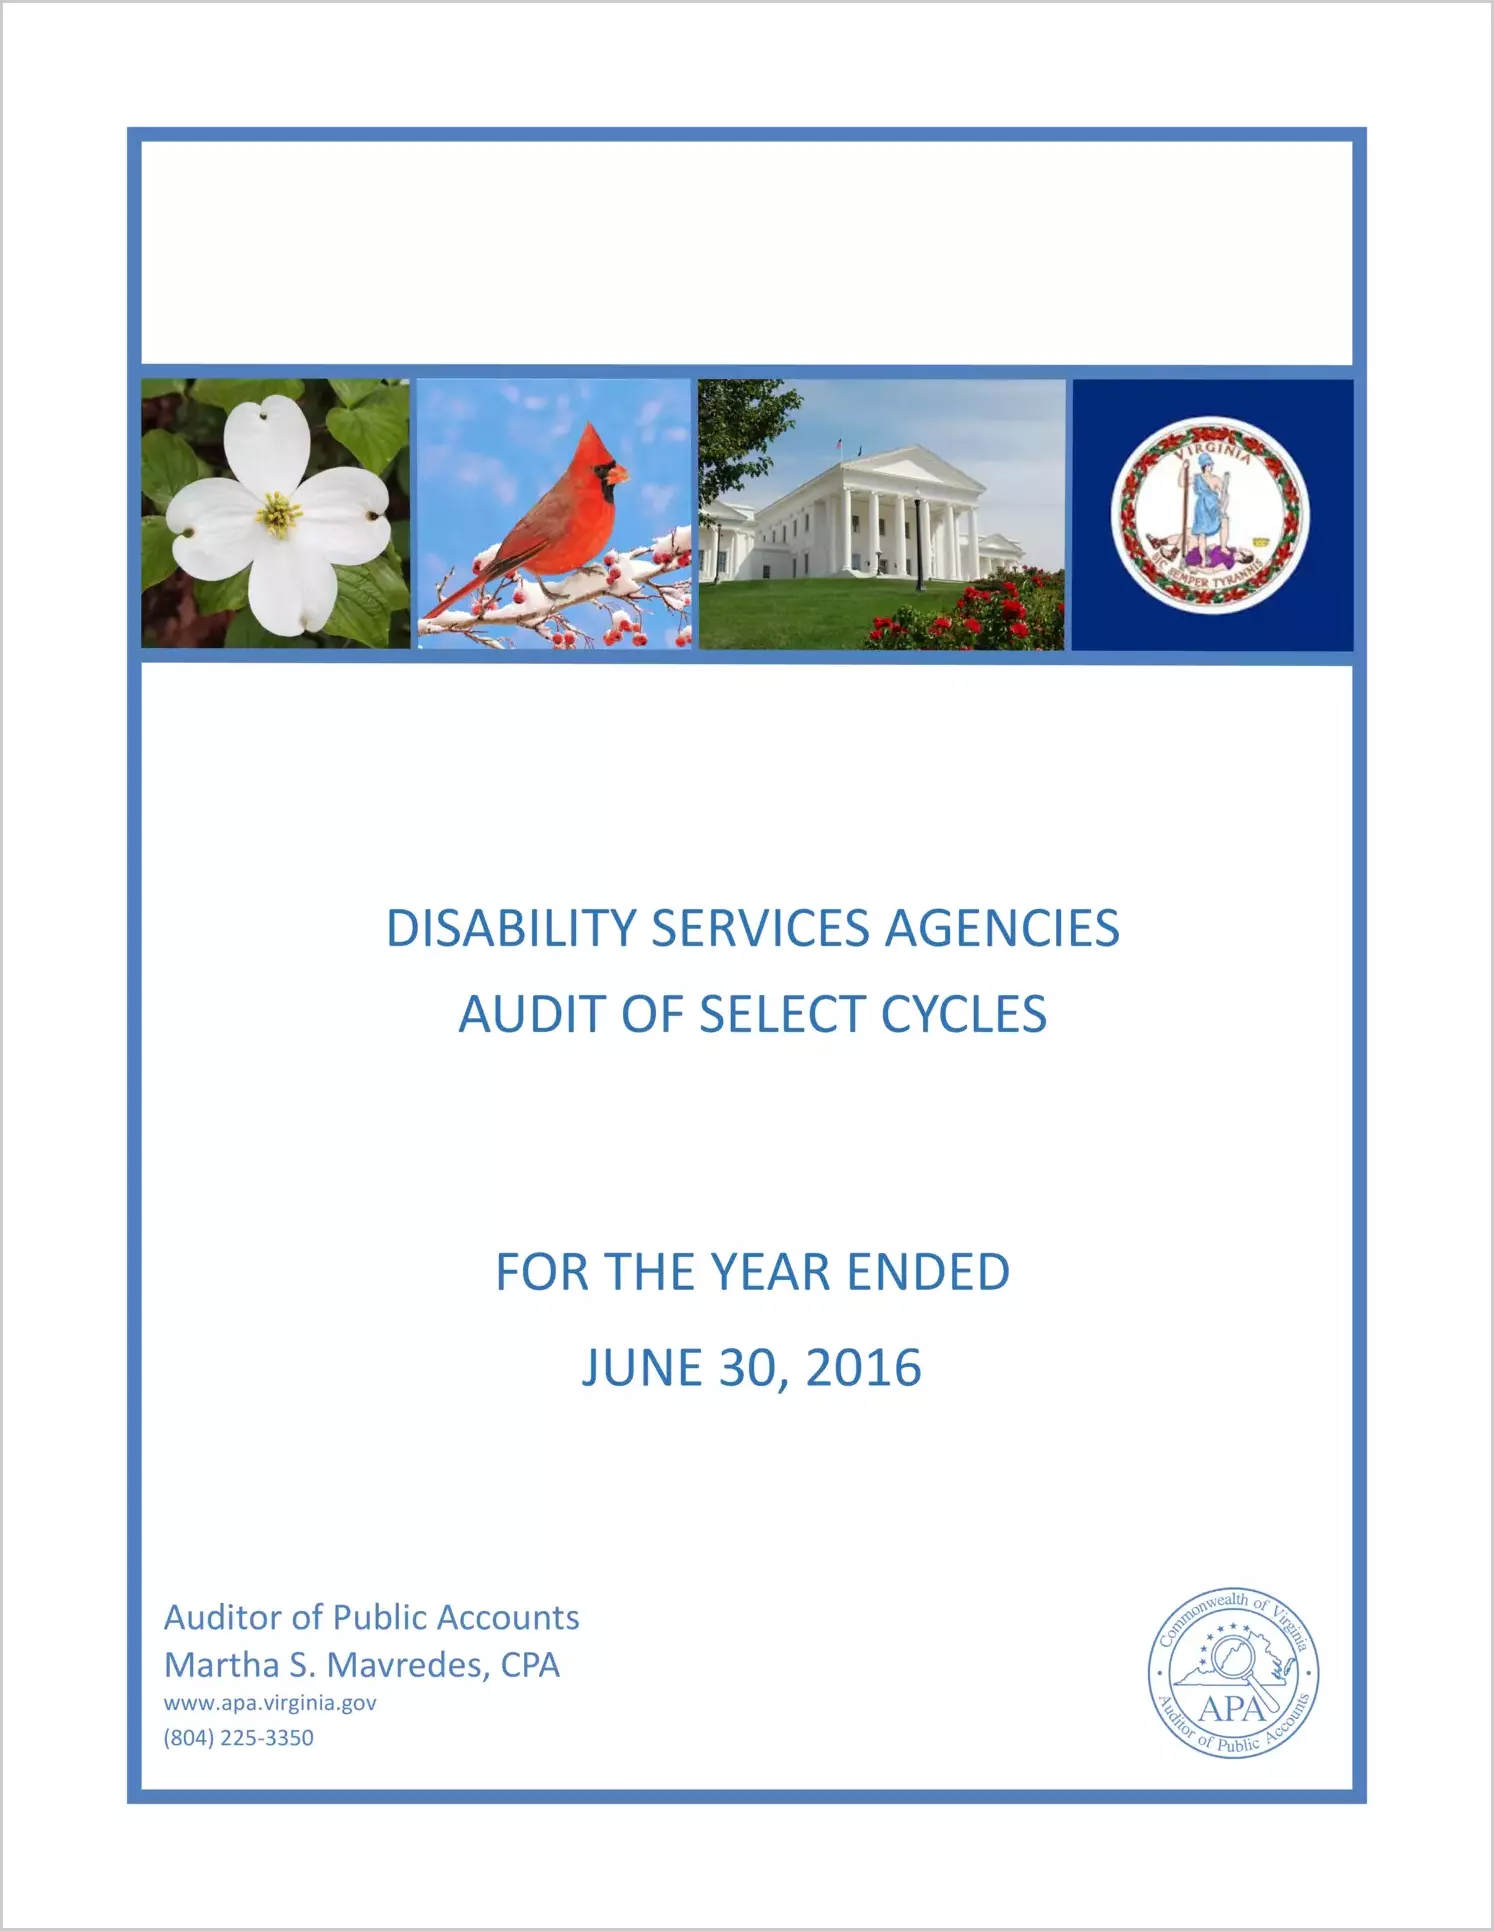 Disability Services Agencies Audit of Select Cycles for the year ended June 30, 2016